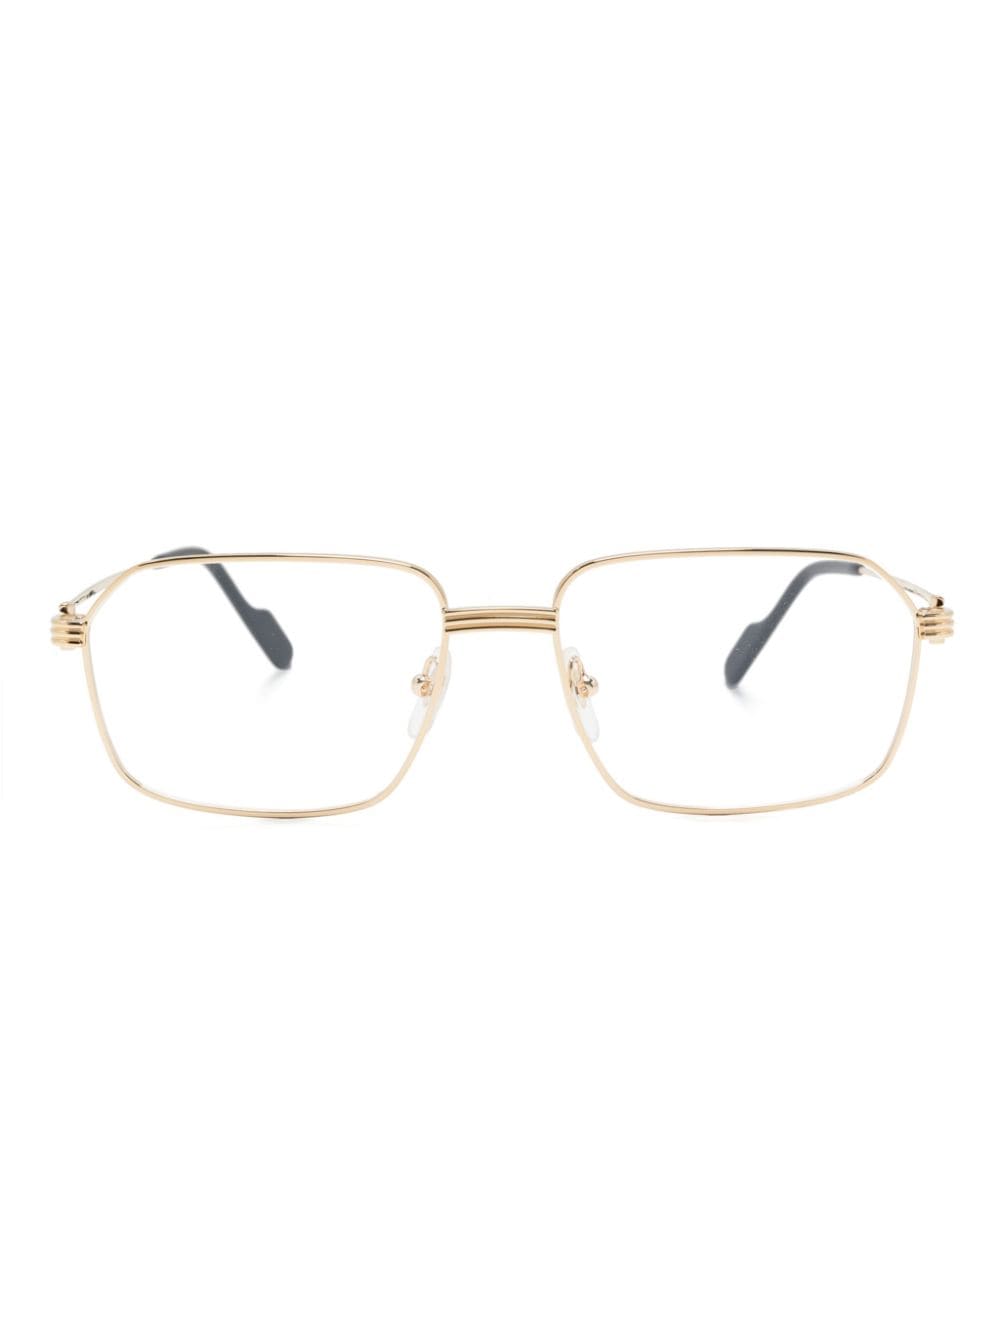 Cartier Square-frame Glasses In Gold